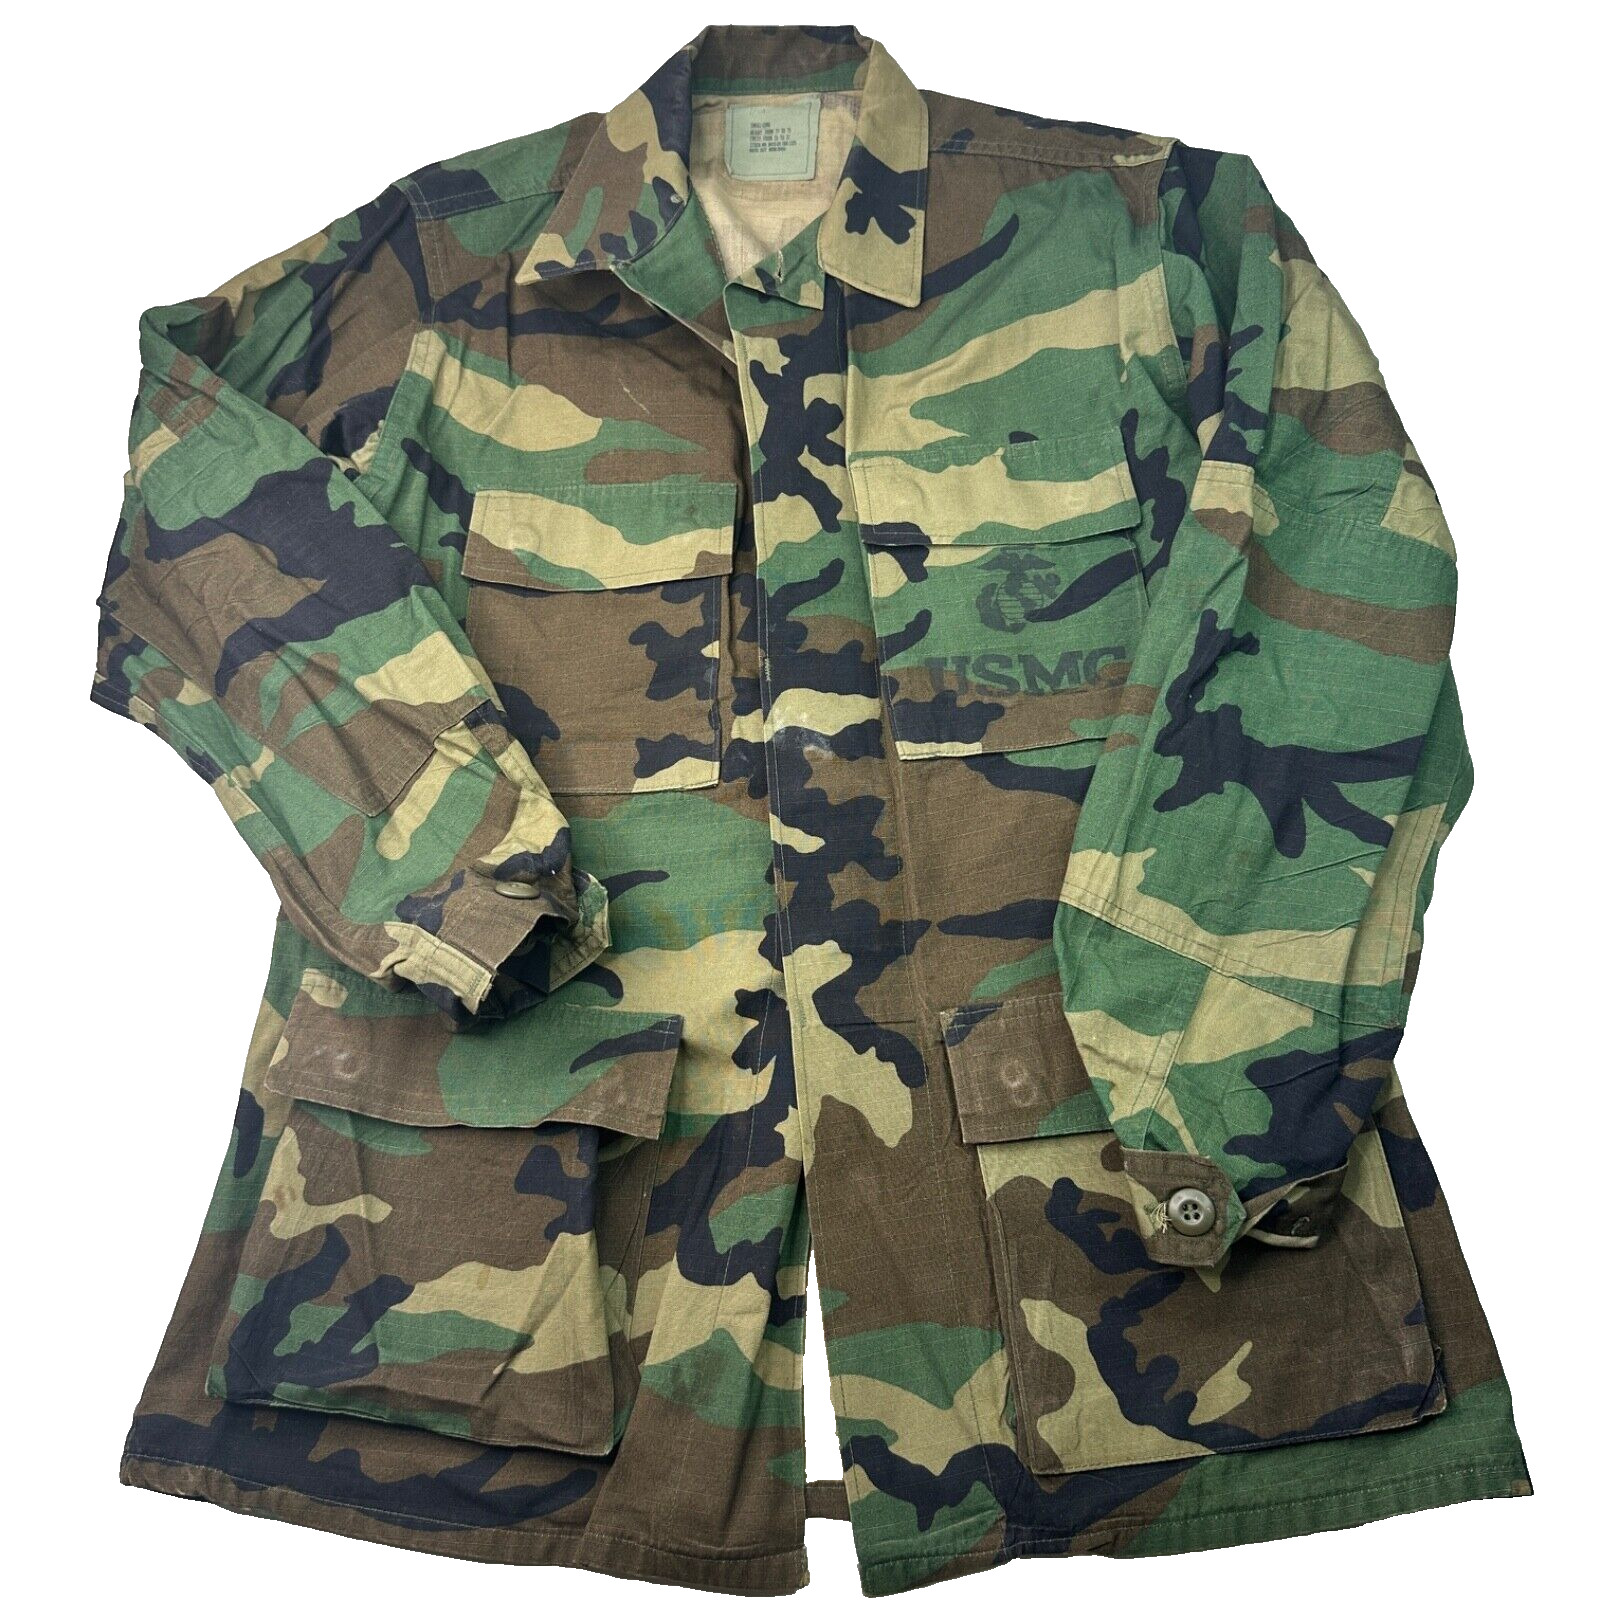 Coat Hot Weather Woodland Camouflage Pattern Combat Size Small Long Chest 33-37